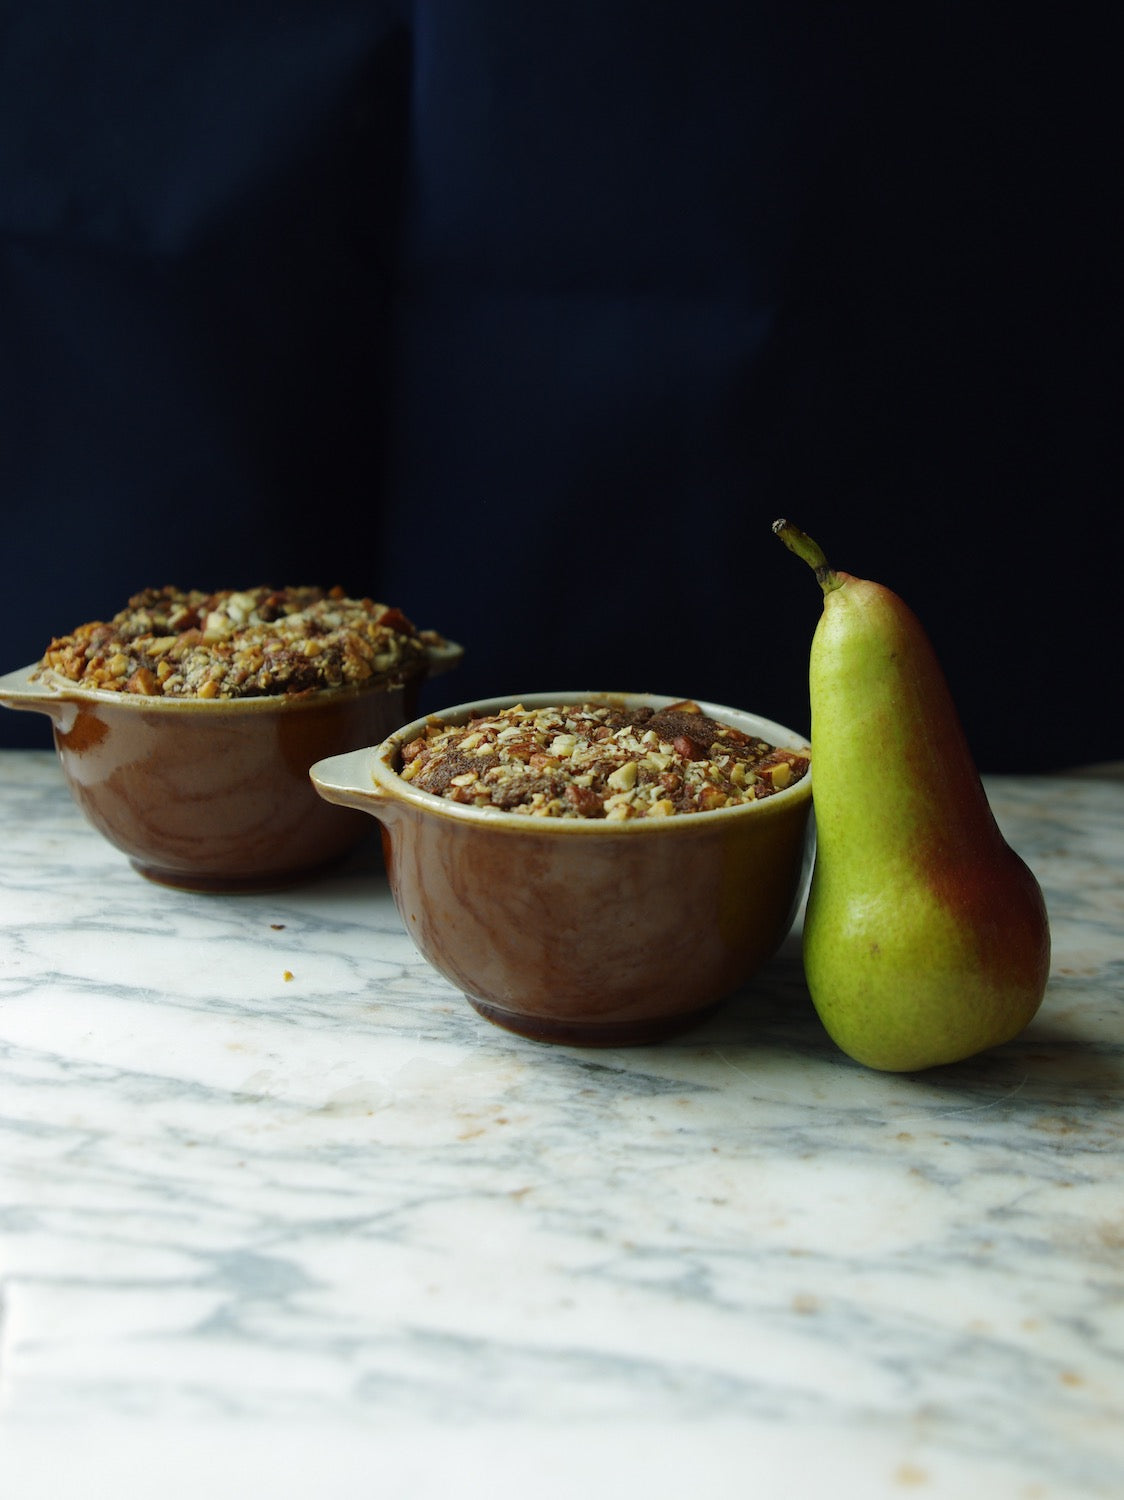 Two brown handled bowls holding baked nut bread next to a pear on a marble counter.